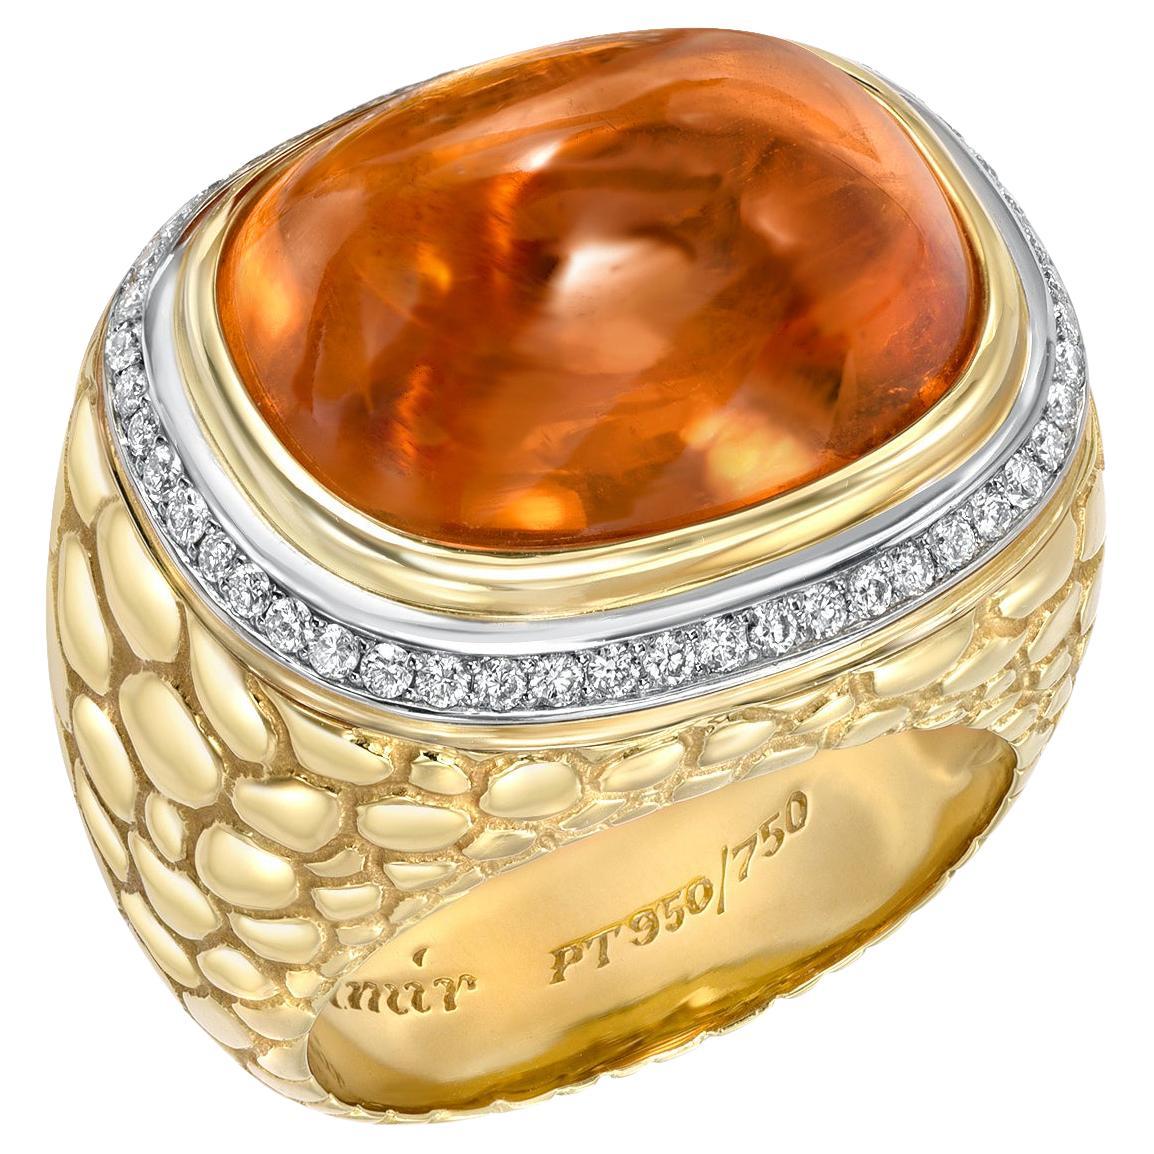 One of a kind, state of the art, Crocodile pattern ring, set with an extraordinary, collection quality 29.93 carat Mandarin Garnet Sugarloaf Cabochon, surrounded by a total of 0.40 carats of diamonds.
Hand crafted by extremely skilled hands in 18K